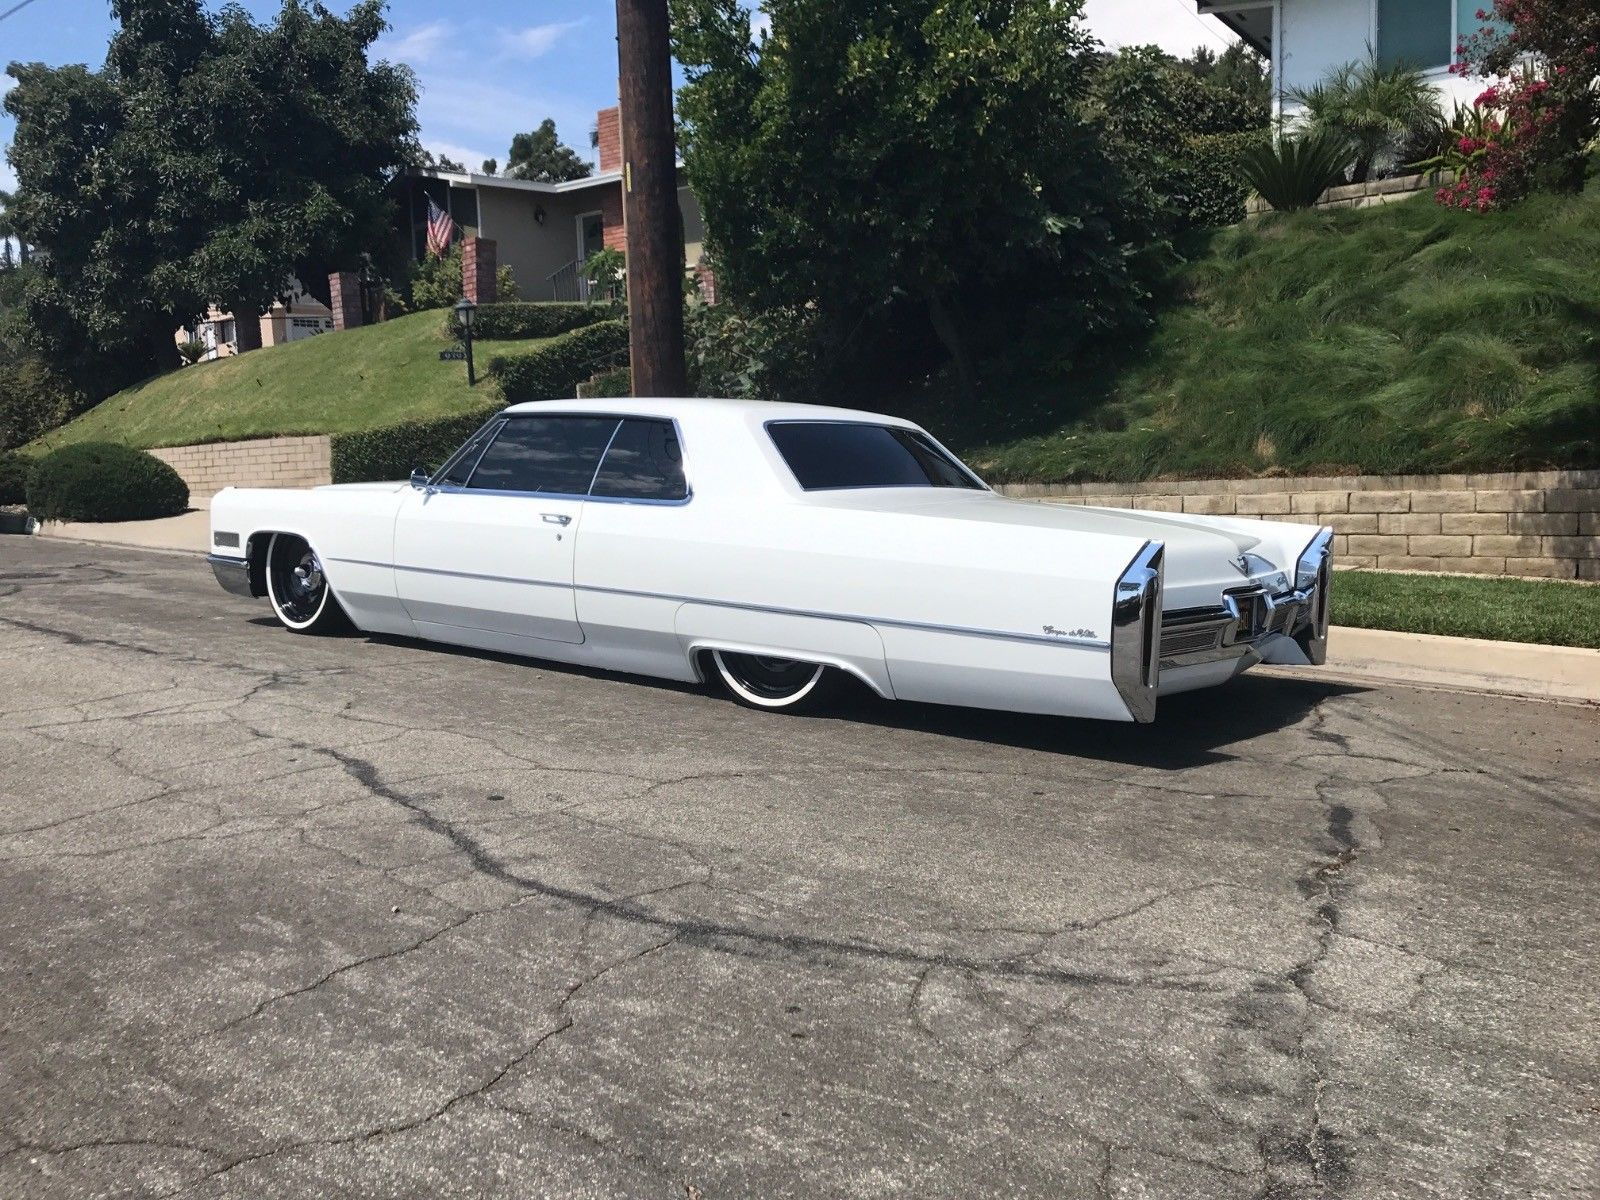 1966 Cadillac DeVille - 1966 Cadillac Deville. Bagged, 46k documented miles, A/C, Mint - Used - VIN J6254234 - 46,000 Miles - 8 cyl - 2WD - Automatic - Coupe - White - Northbrook, IL 60062, United States